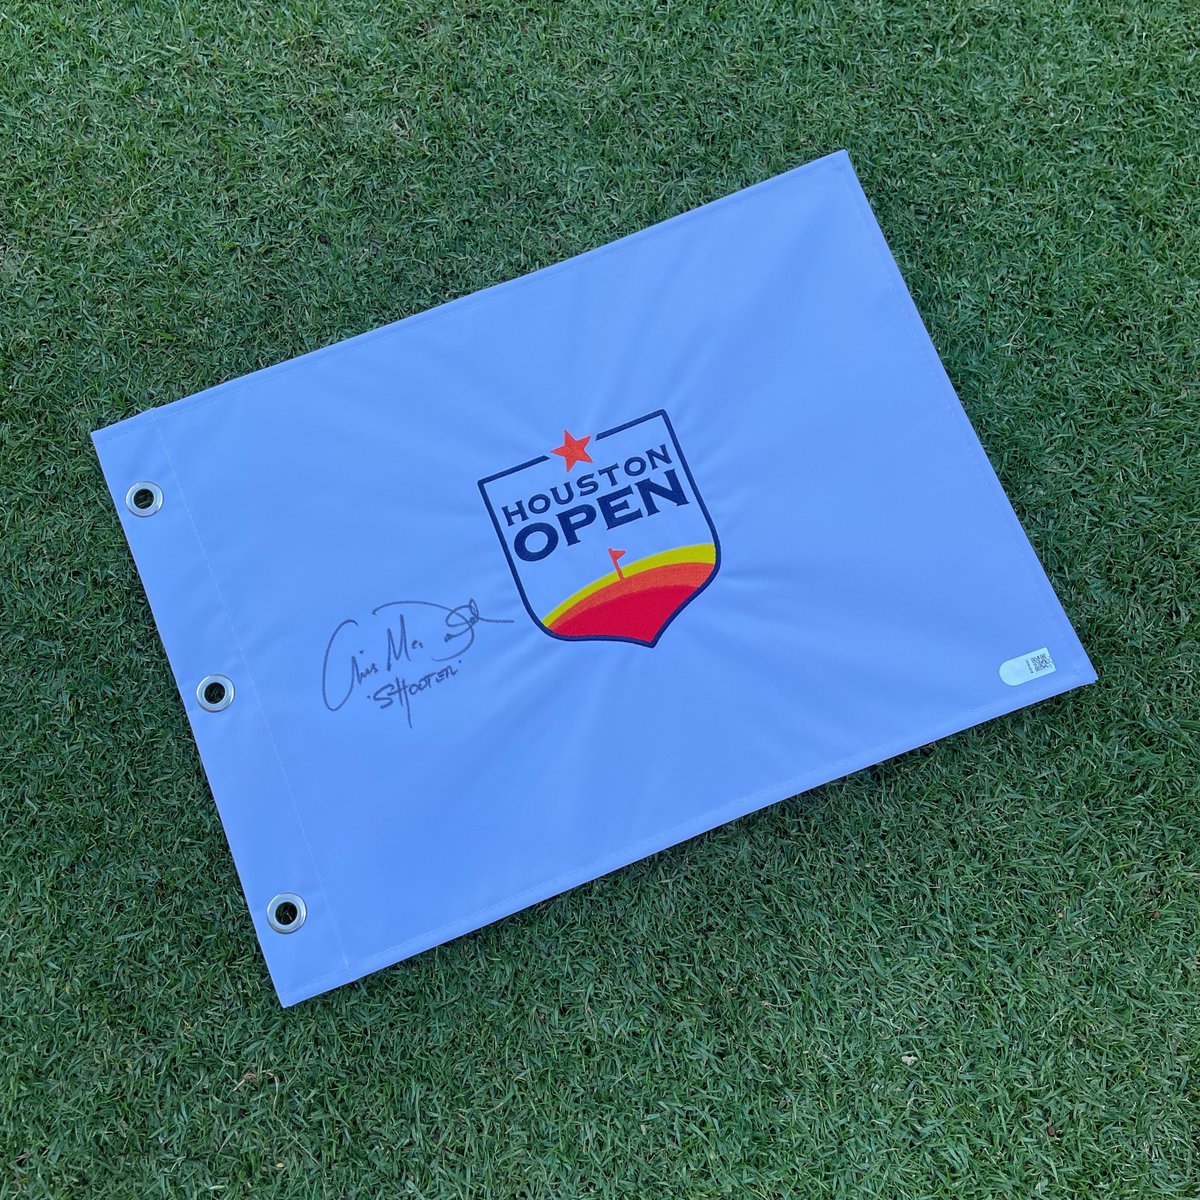 Happy Friday! Retweet this tweet and follow @HouOpenGolf for a chance to win this signed Shooter McGavin pin flag. Winner will be chosen at 9am CT on Oct. 3rd.